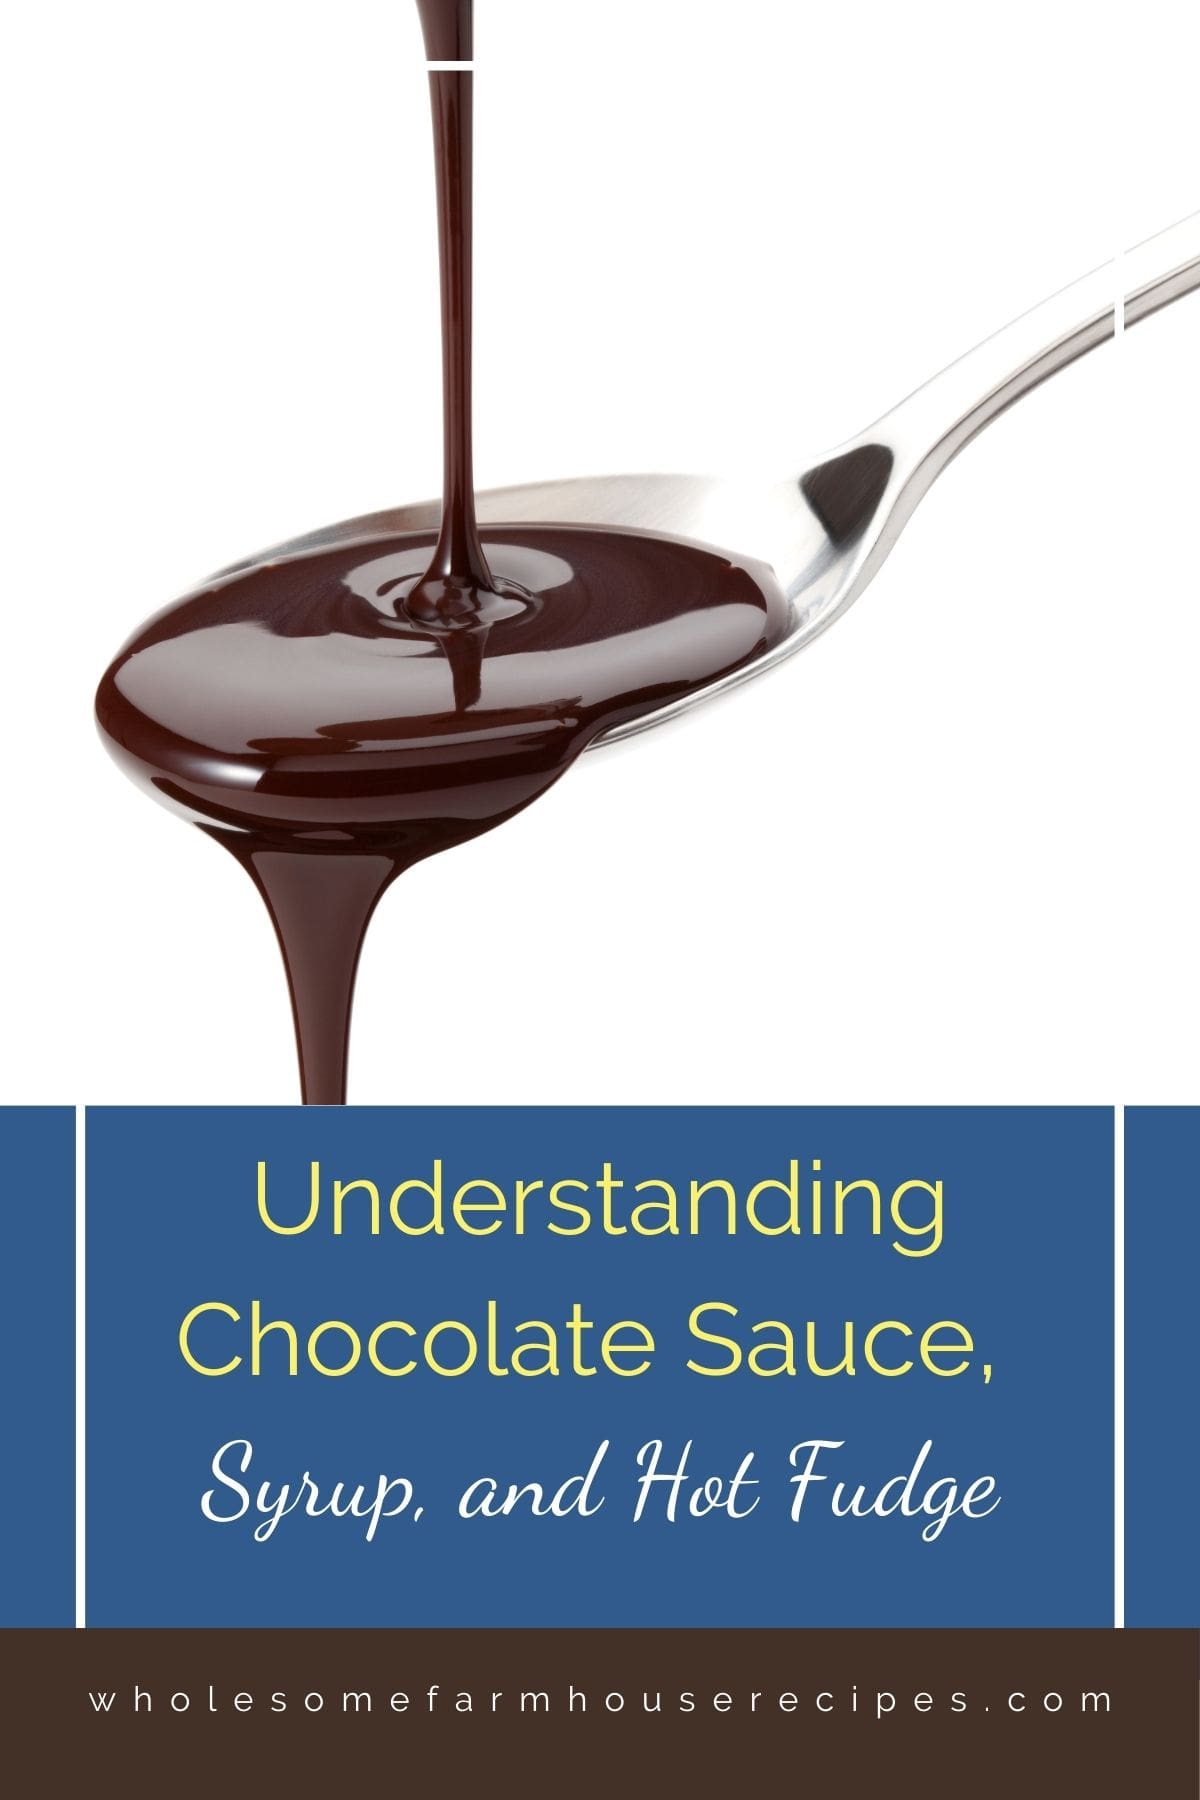 Understanding Chocolate Sauce, Syrup, and Hot Fudge